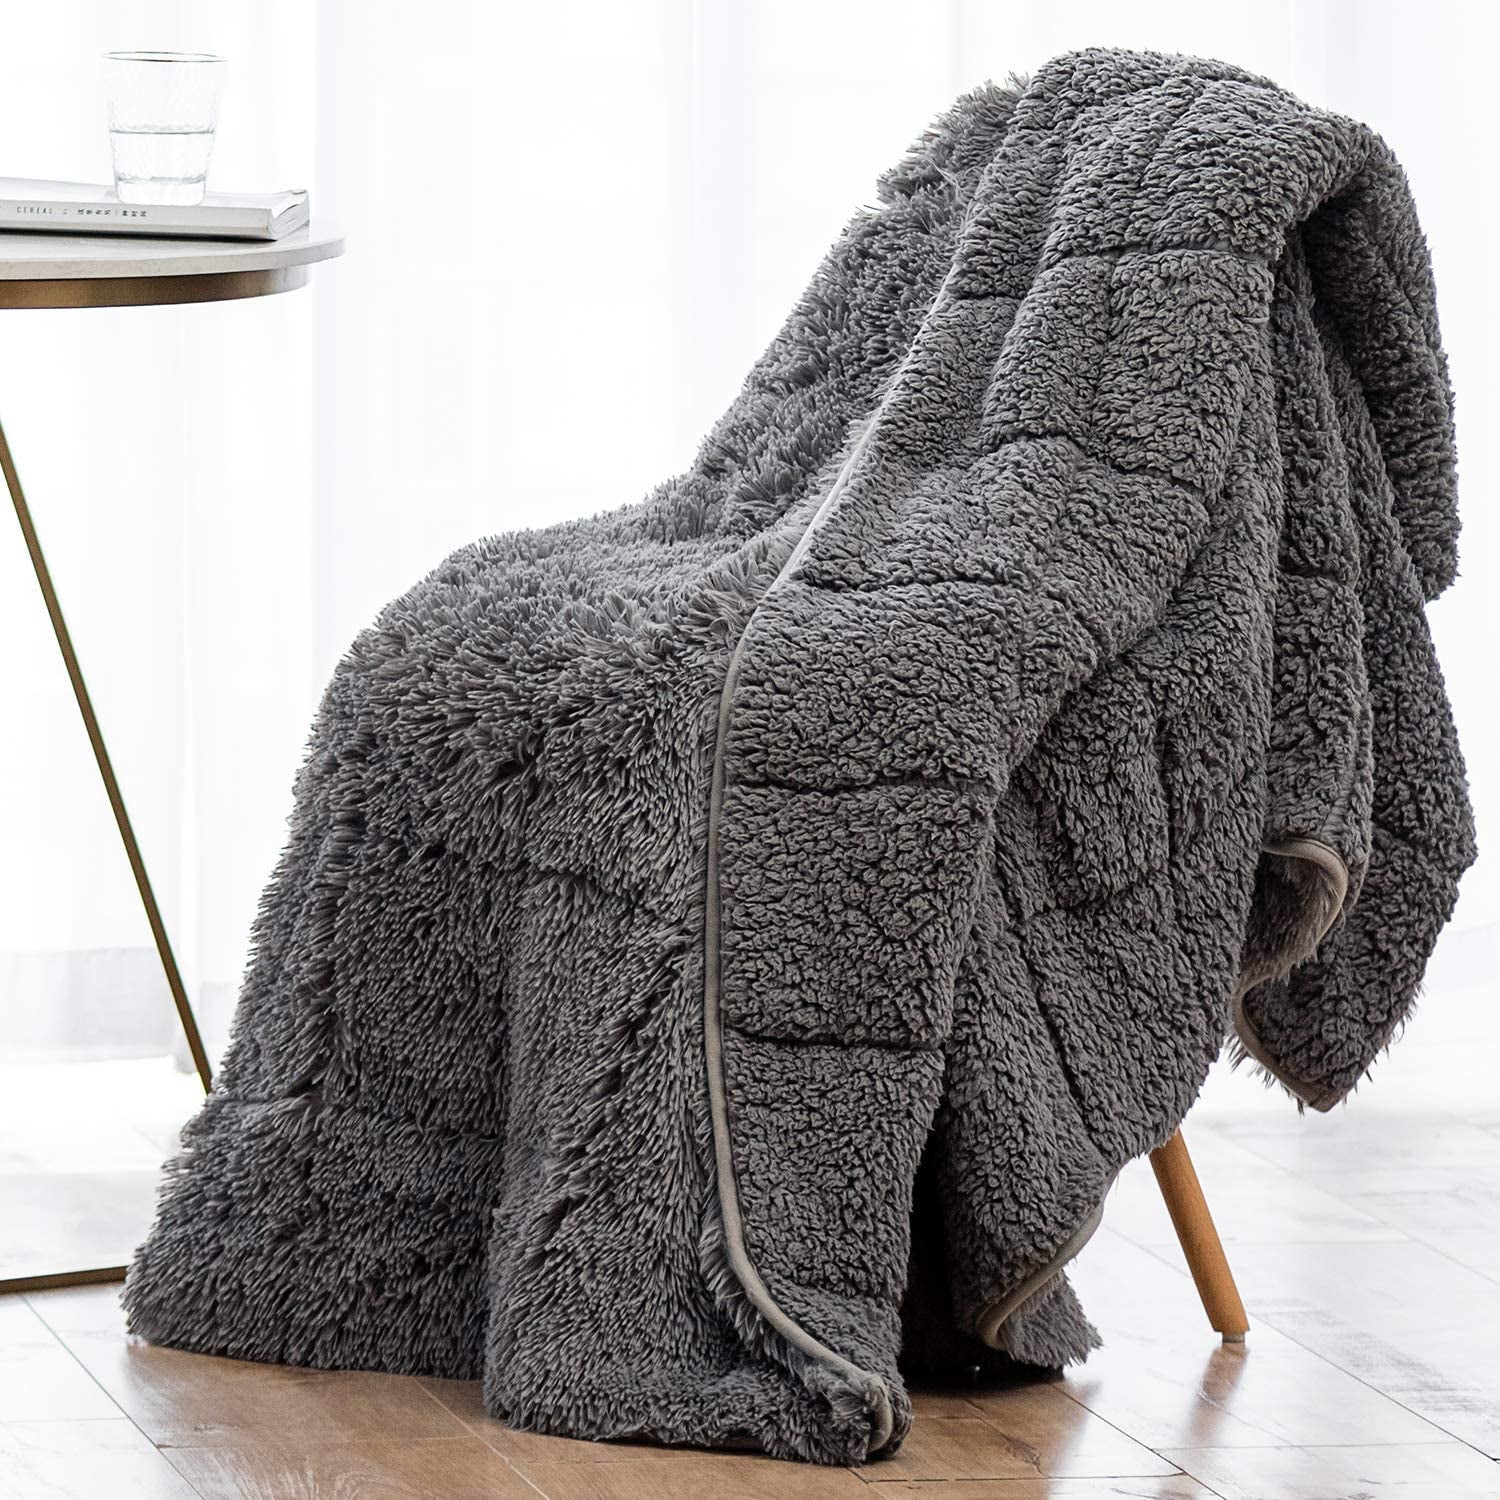 Luxurious Shaggy Long Fur Faux Fur Weighted Blanket - Cozy and Plush Sherpa Long Hair Blanket for Adults,15Lbs, Reverse Heavy Blanket for Bed or Couch - Grey, 60 X 80 Inches